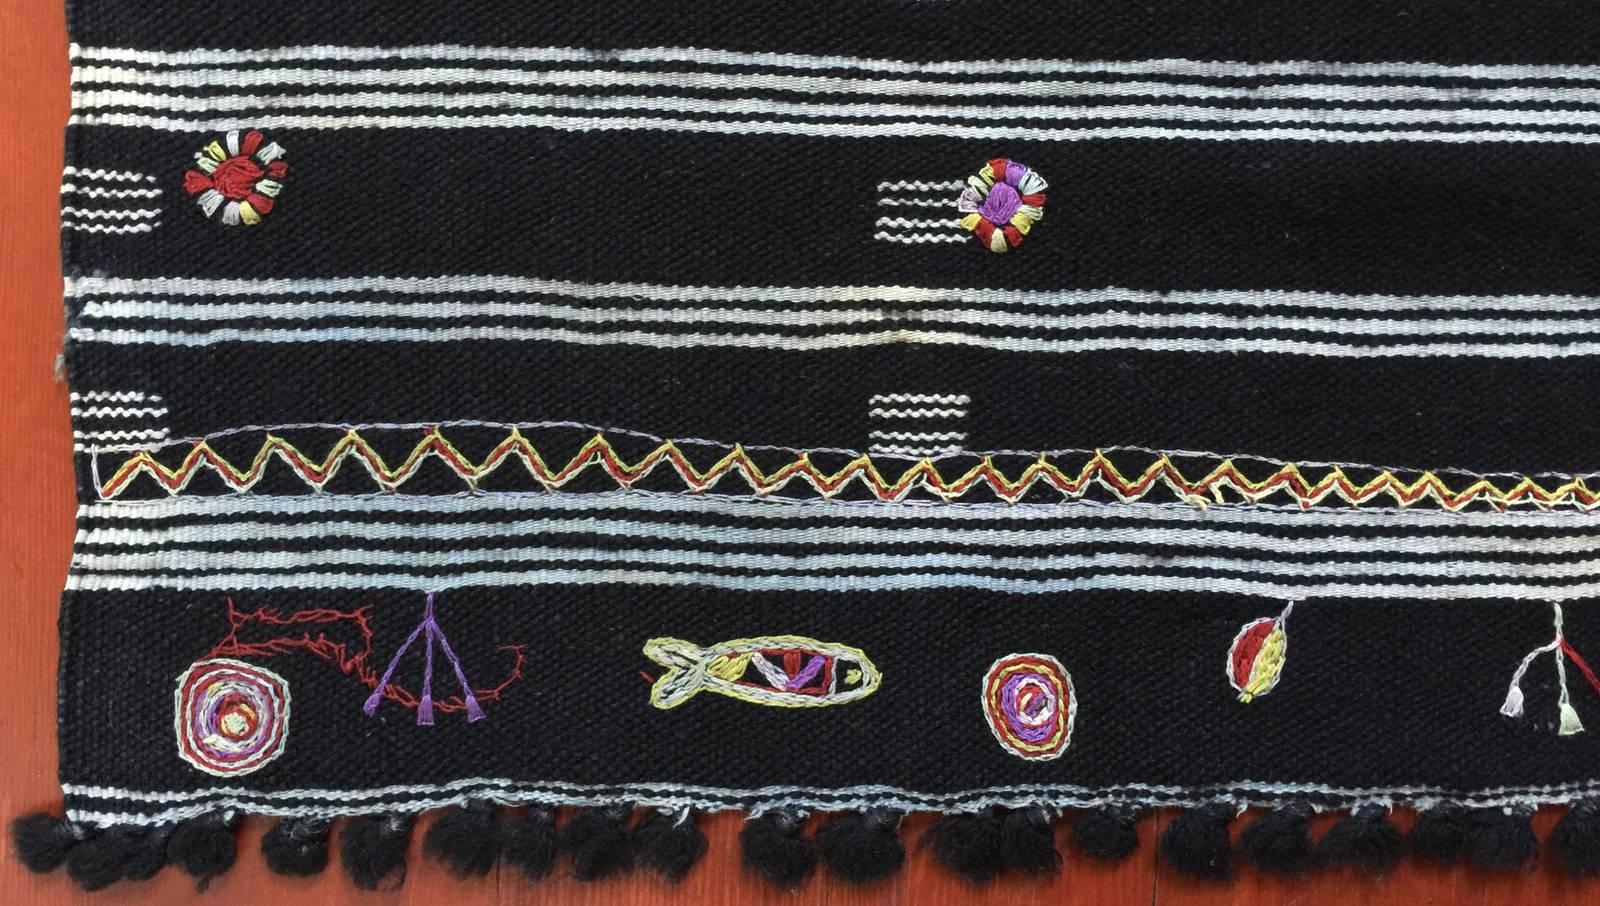 Mid-20th century tribal baknough (woman's head covering), Chott Oulad Amar, Tunisia.

This is an unusual baknough from a very small area on the Tunisian coast, made even more special by the talismanic embroidery at both ends. Excellent condition.